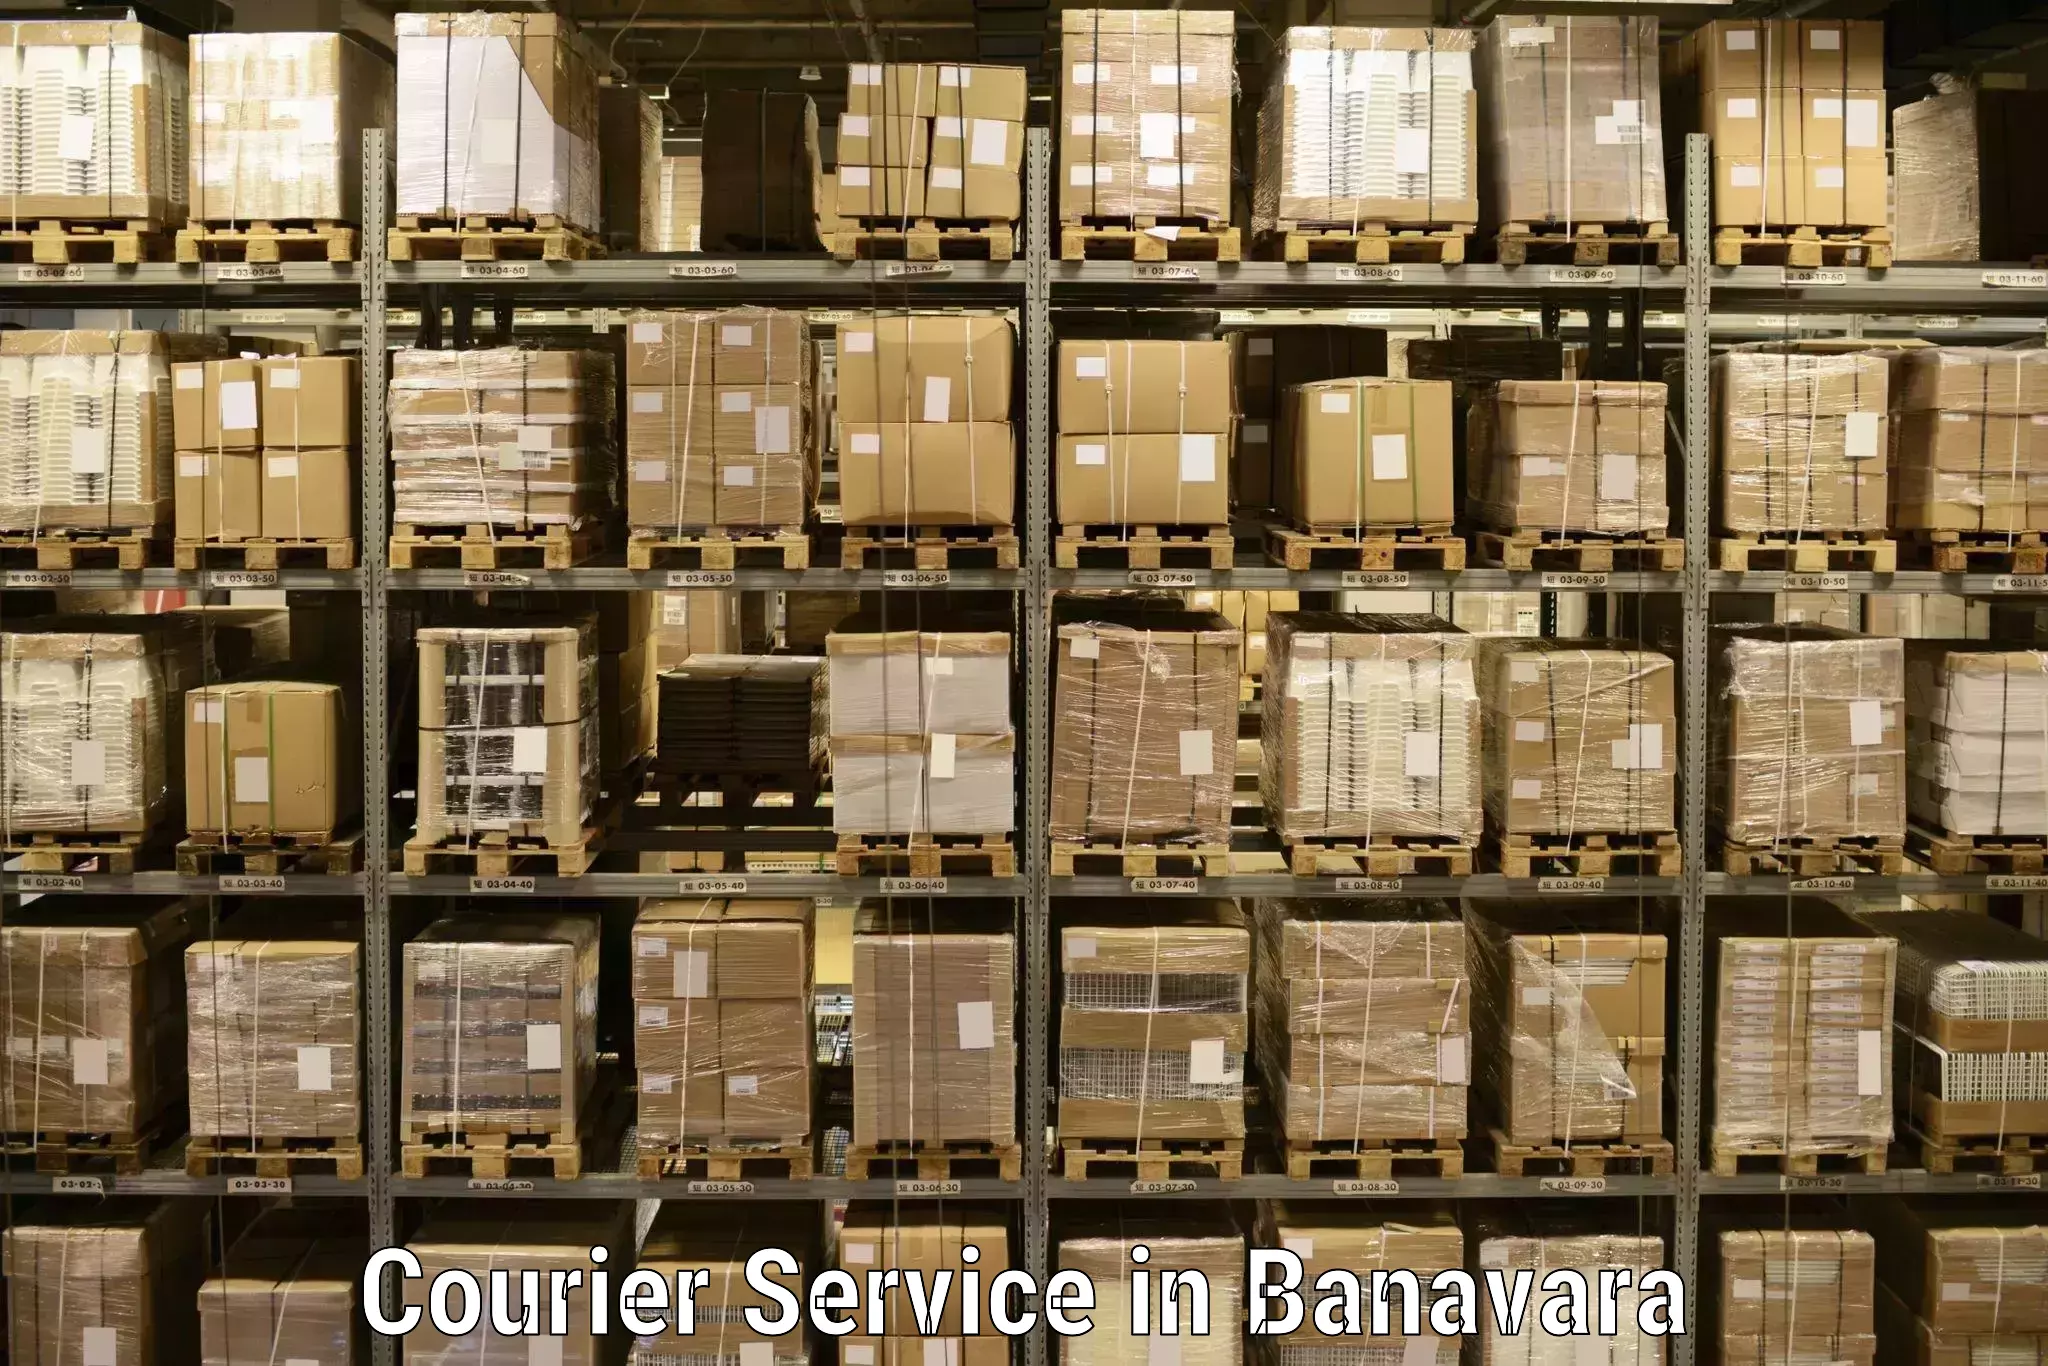 On-demand delivery in Banavara